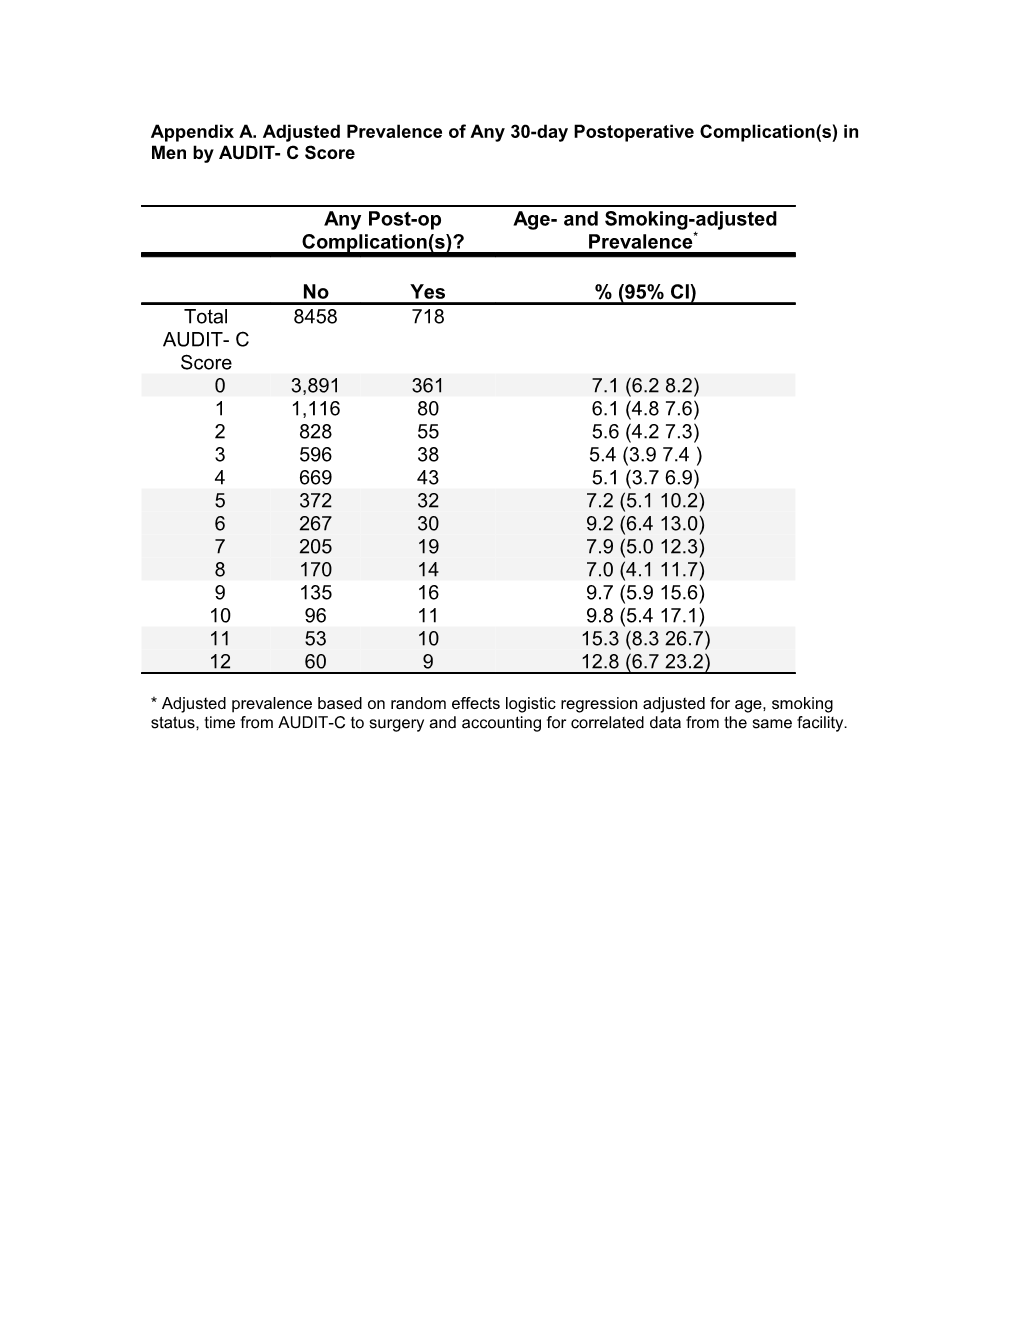 Appendix A. Adjusted Prevalence of Any 30-Day Postoperative Complication(S) in Men By